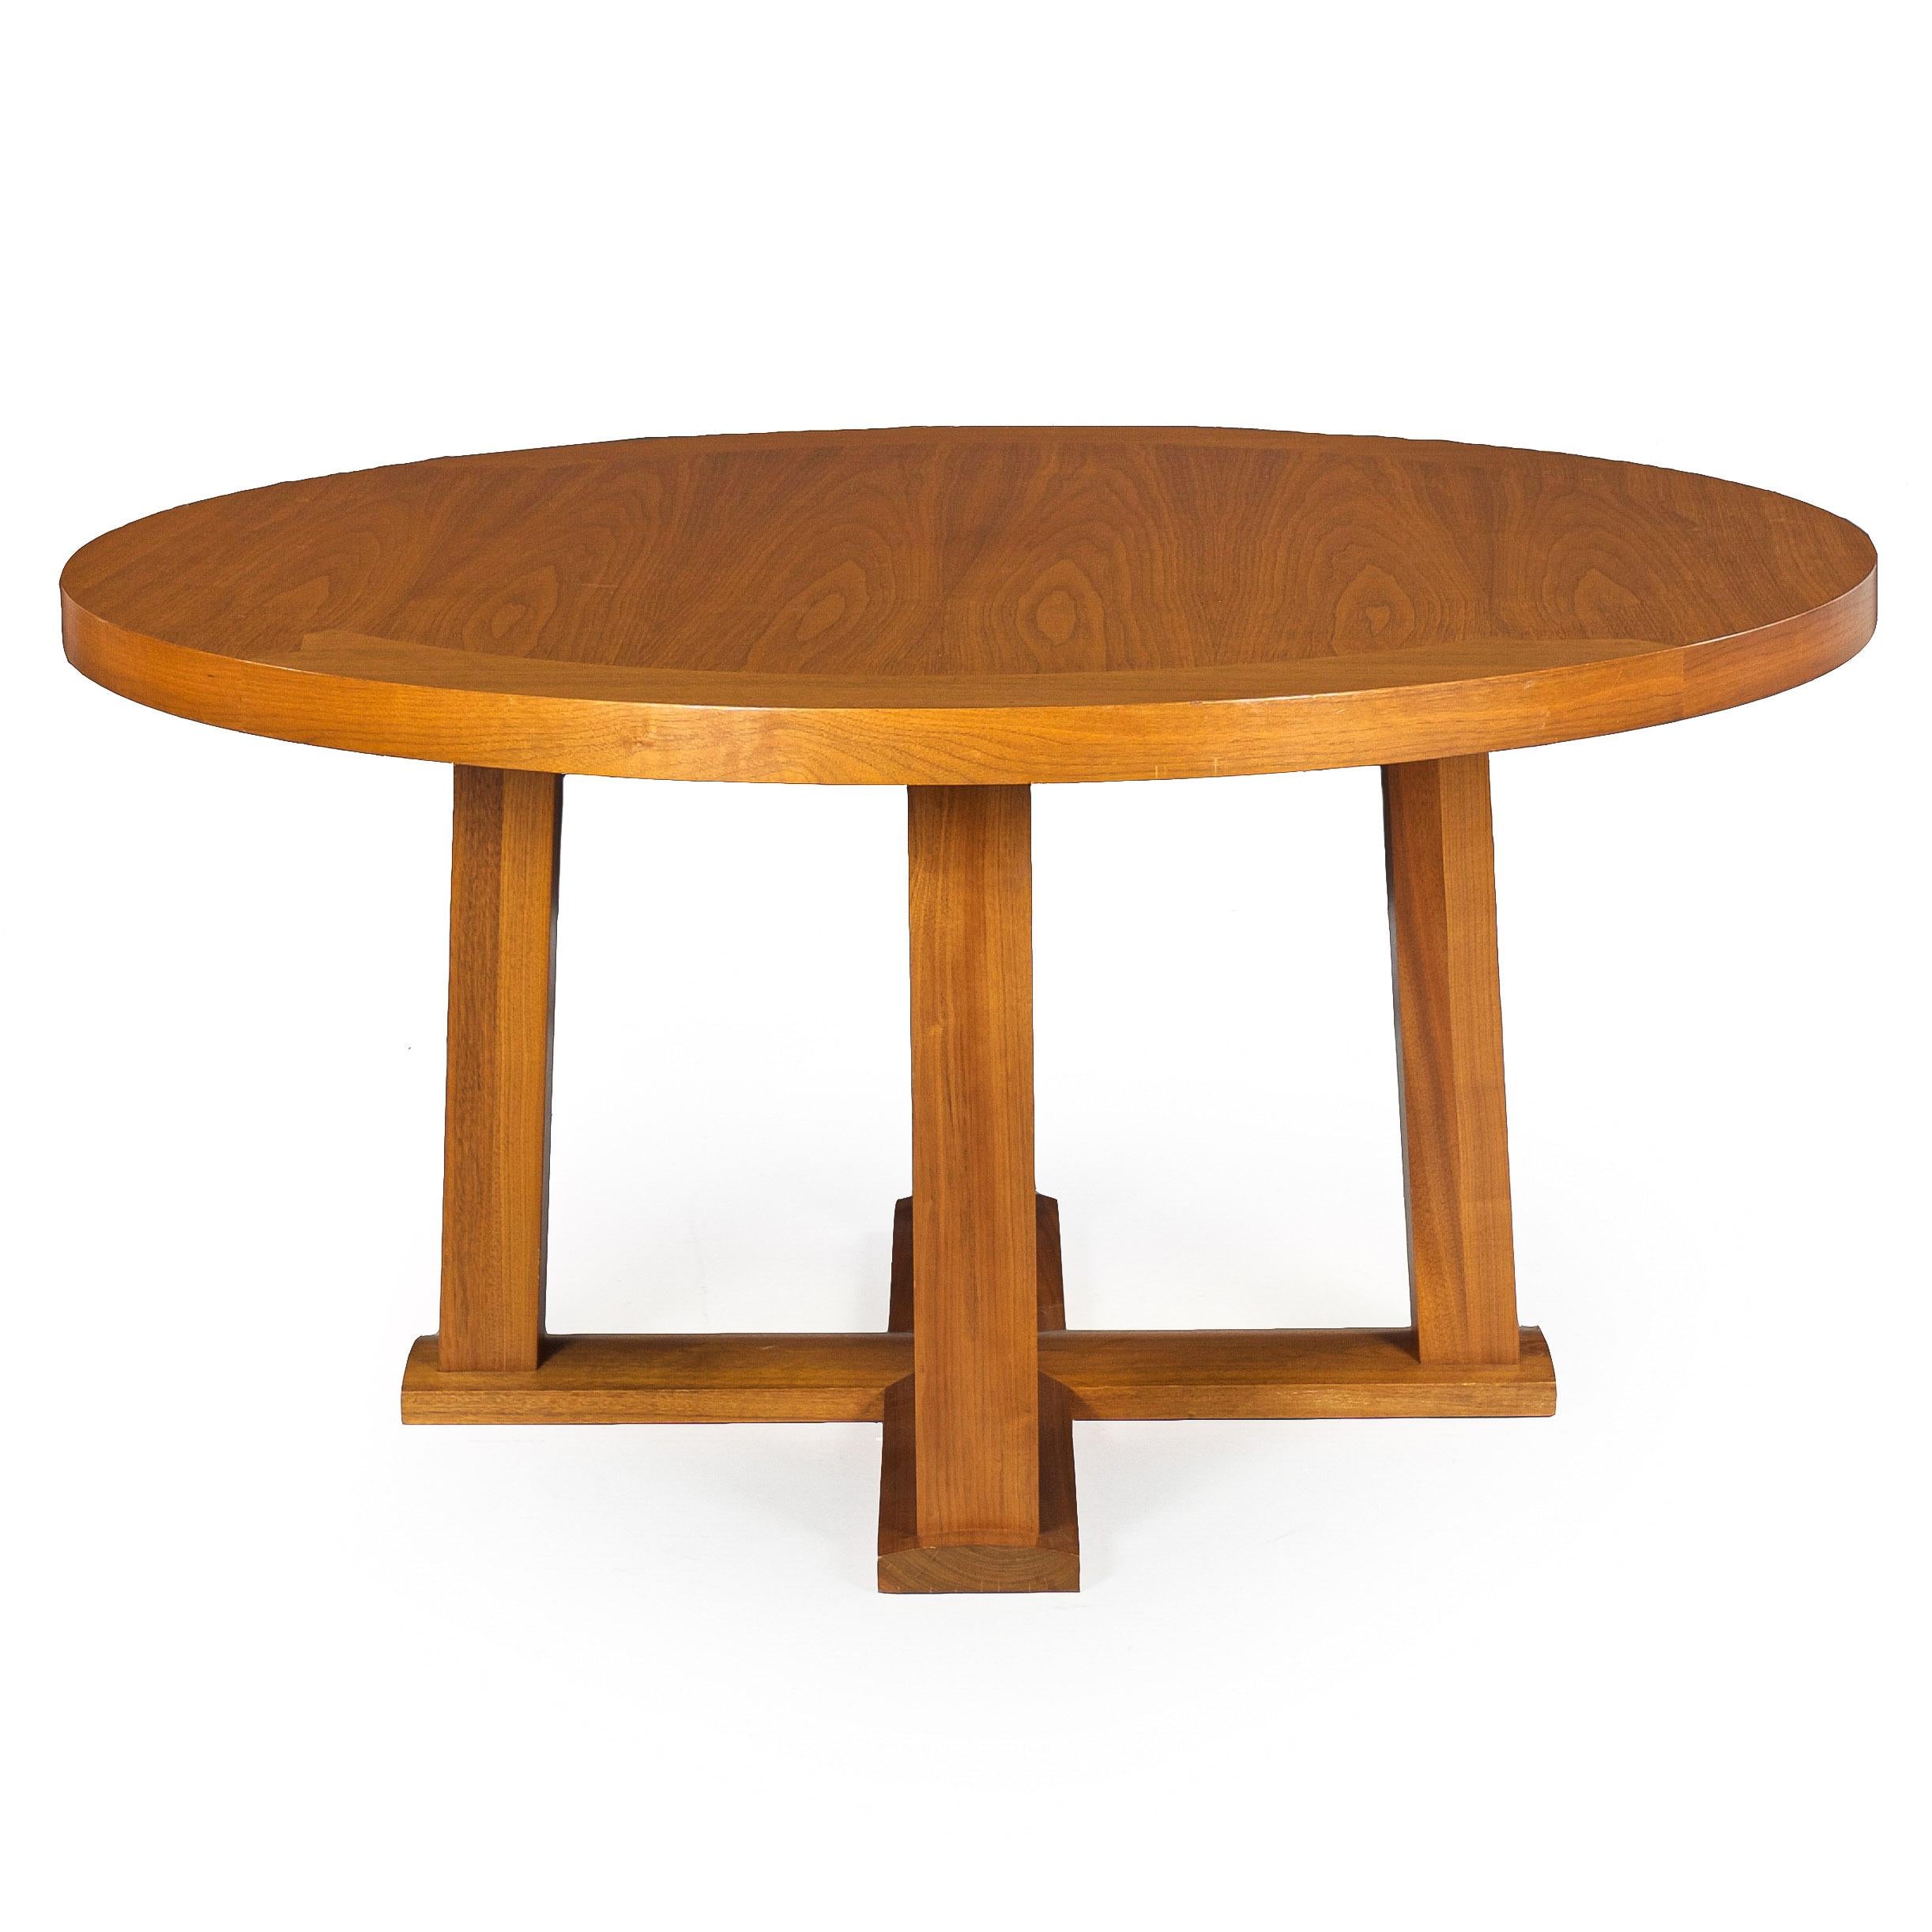 A fantastic circular dining table designed by Christian Liagre for Holly Hunt with the original label affixed to the underside, the piece features squared peg details in the rim surrounding the larger walnut surface with a generous edging; it is